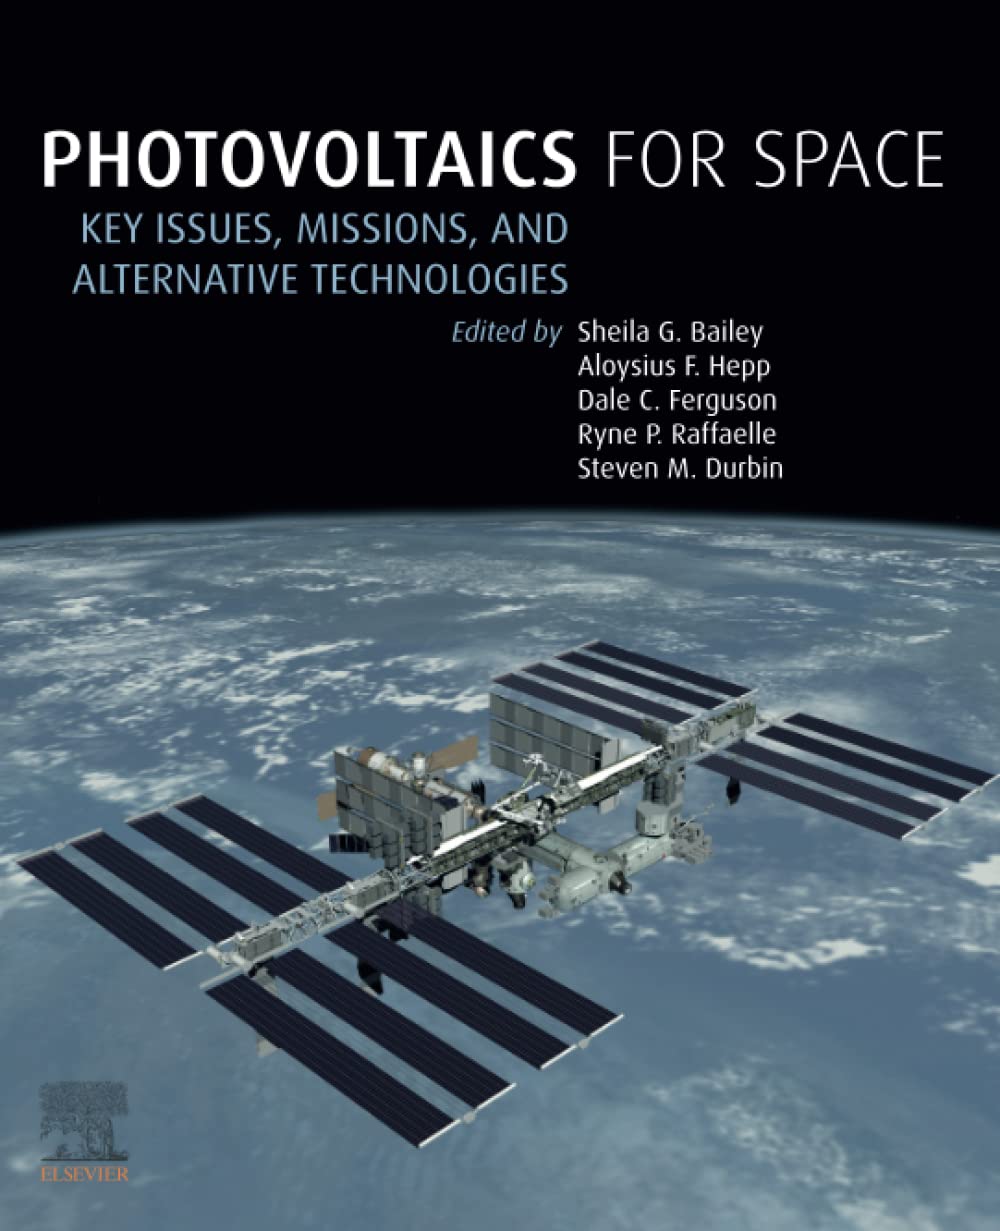 PHOTOVOLTAICS FOR SPACE: KEY ISSUES, MISSIONS AND ALTERNATIVE TECHNOLOGIES